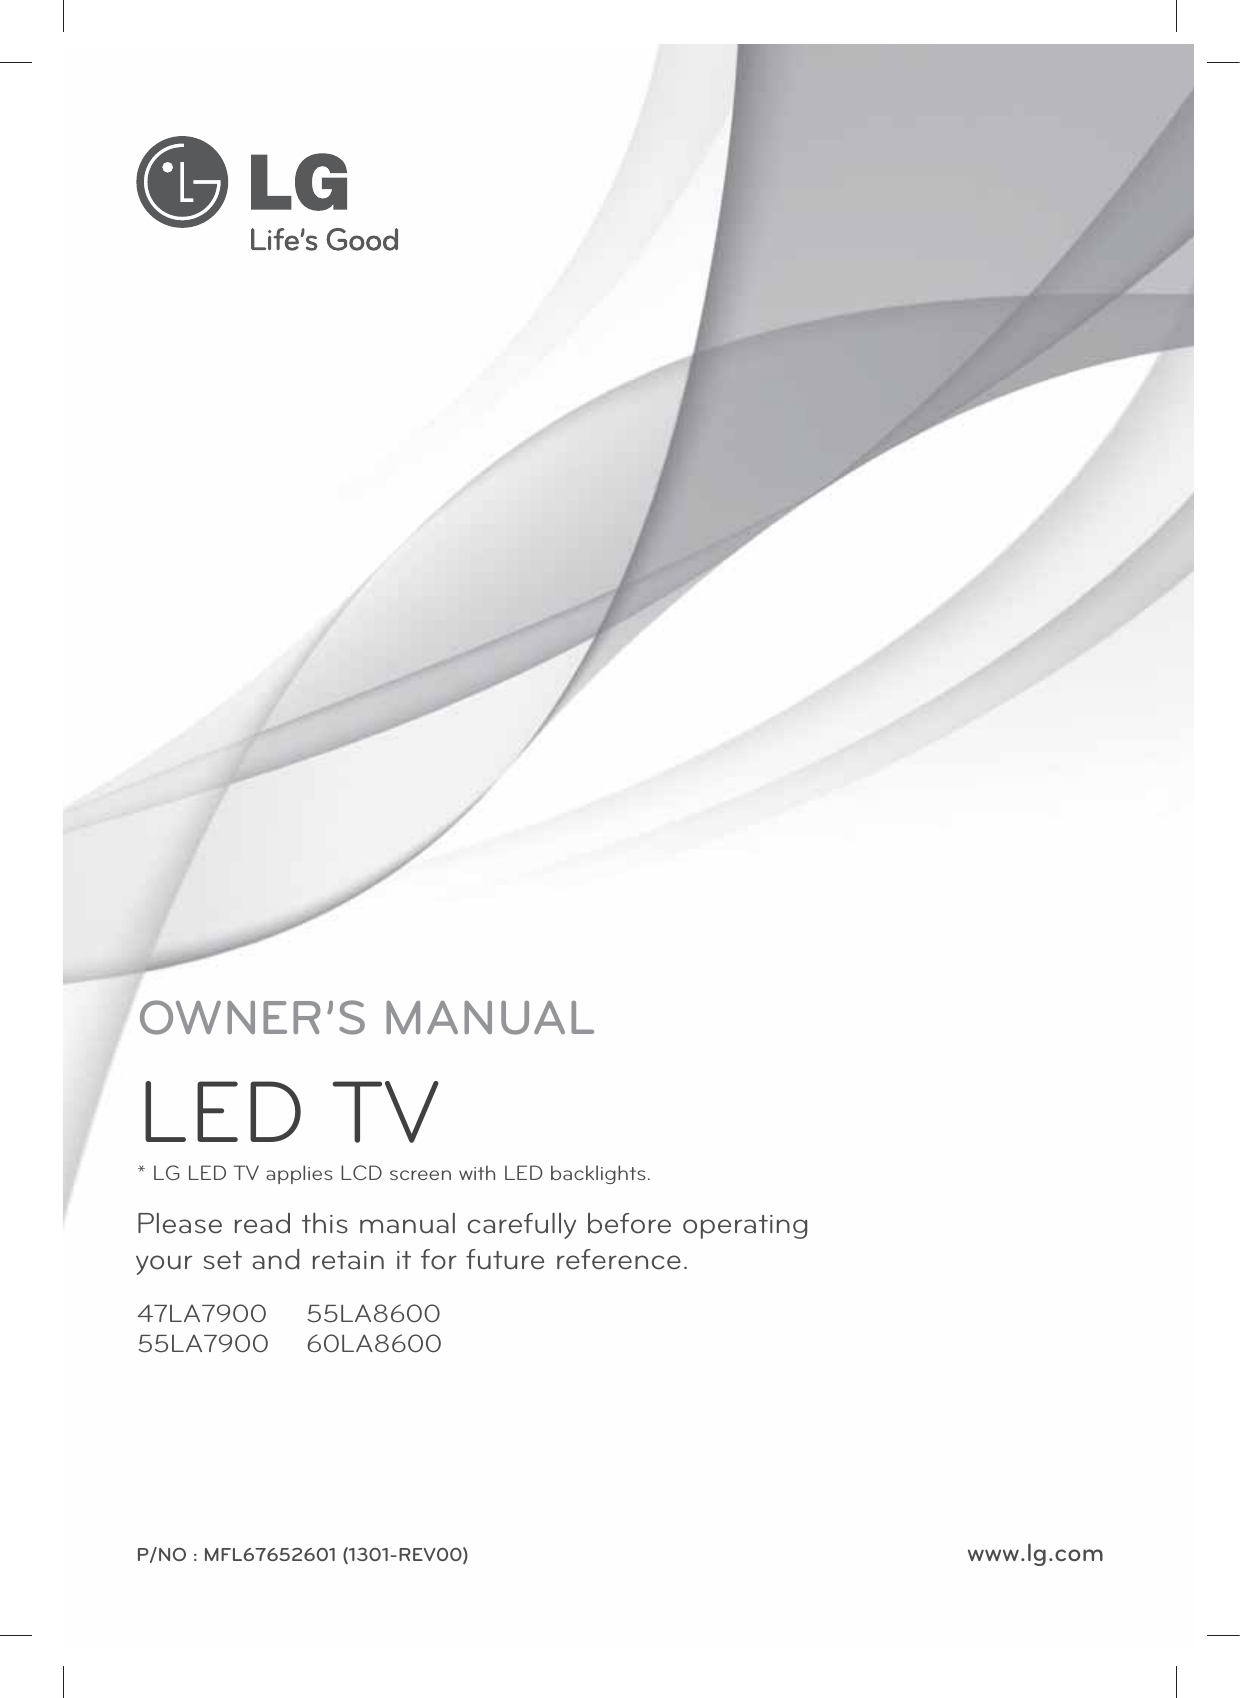 www.lg.comP/NO : MFL67652601 (1301-REV00)55LA860060LA8600Please read this manual carefully before operating your set and retain it for future reference.OWNER’S MANUALLED TV* LG LED TV applies LCD screen with LED backlights.47LA790055LA7900